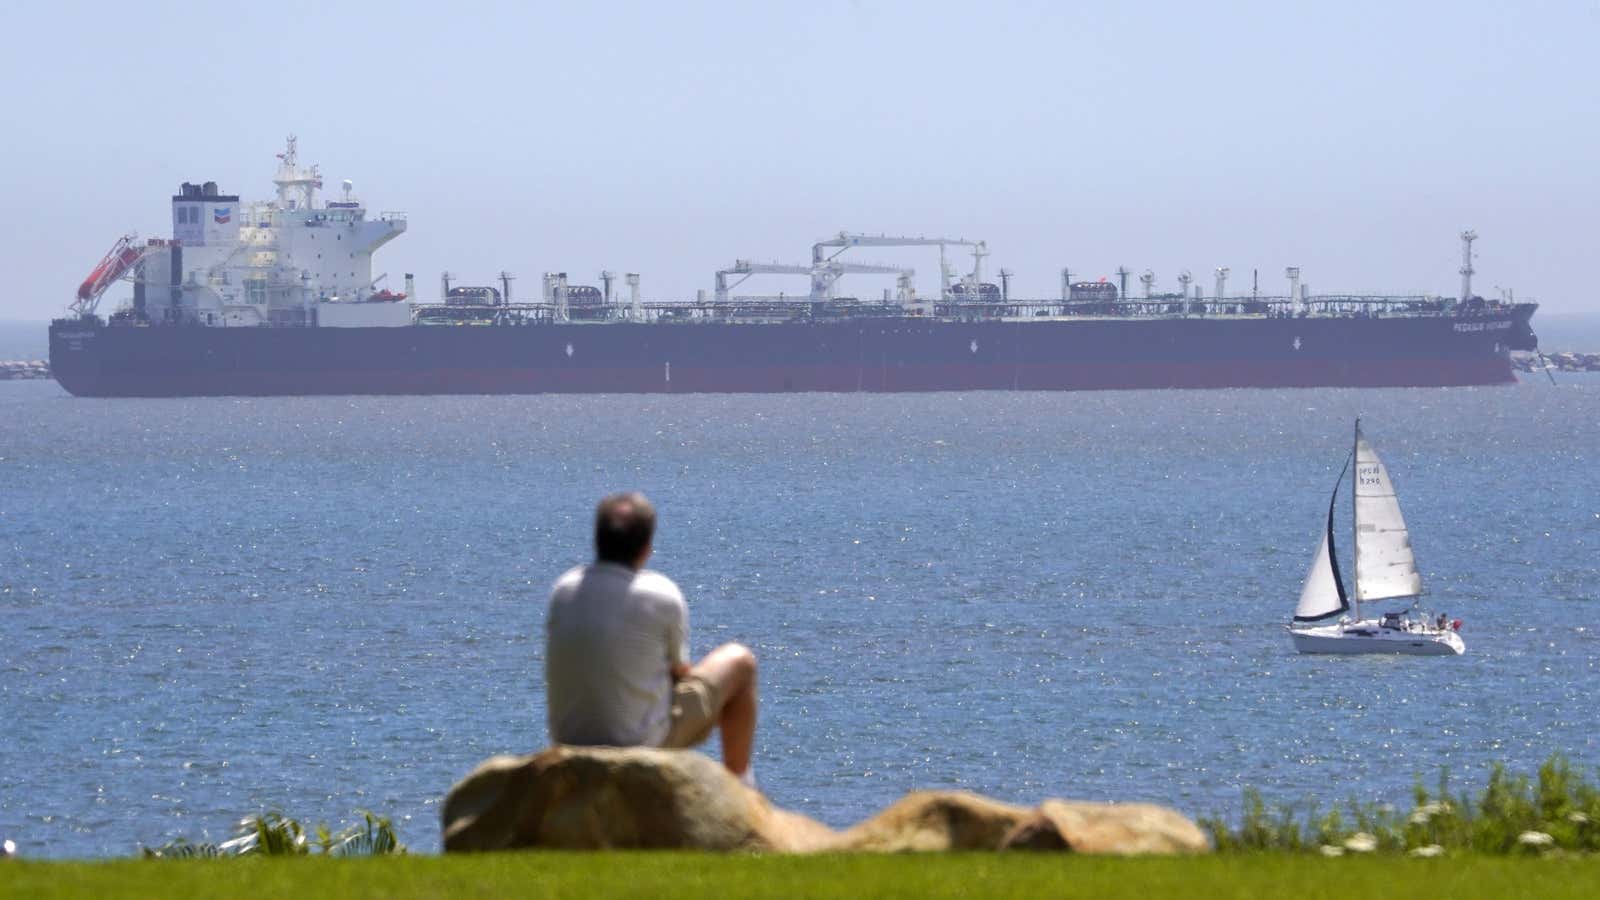 About three dozen oil-filled tankers are parked off the coast of California with nowhere to go.